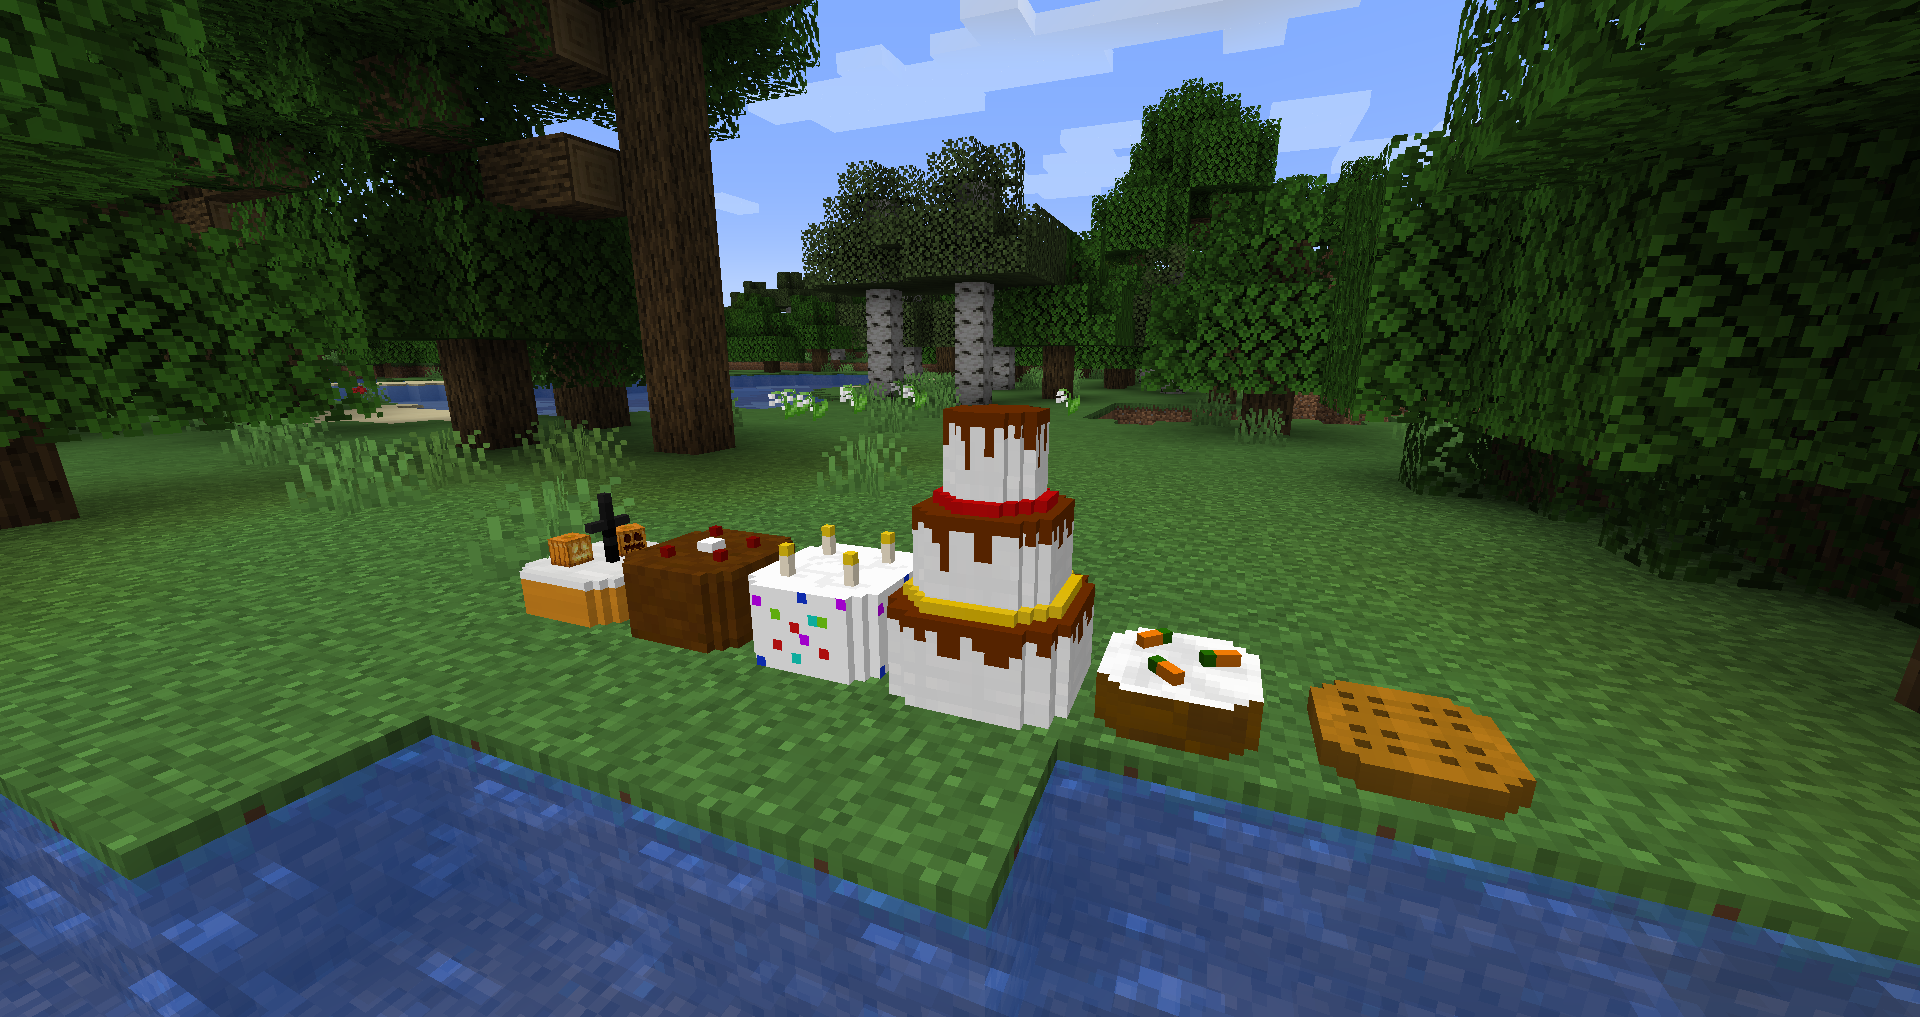 A selection of cakes!